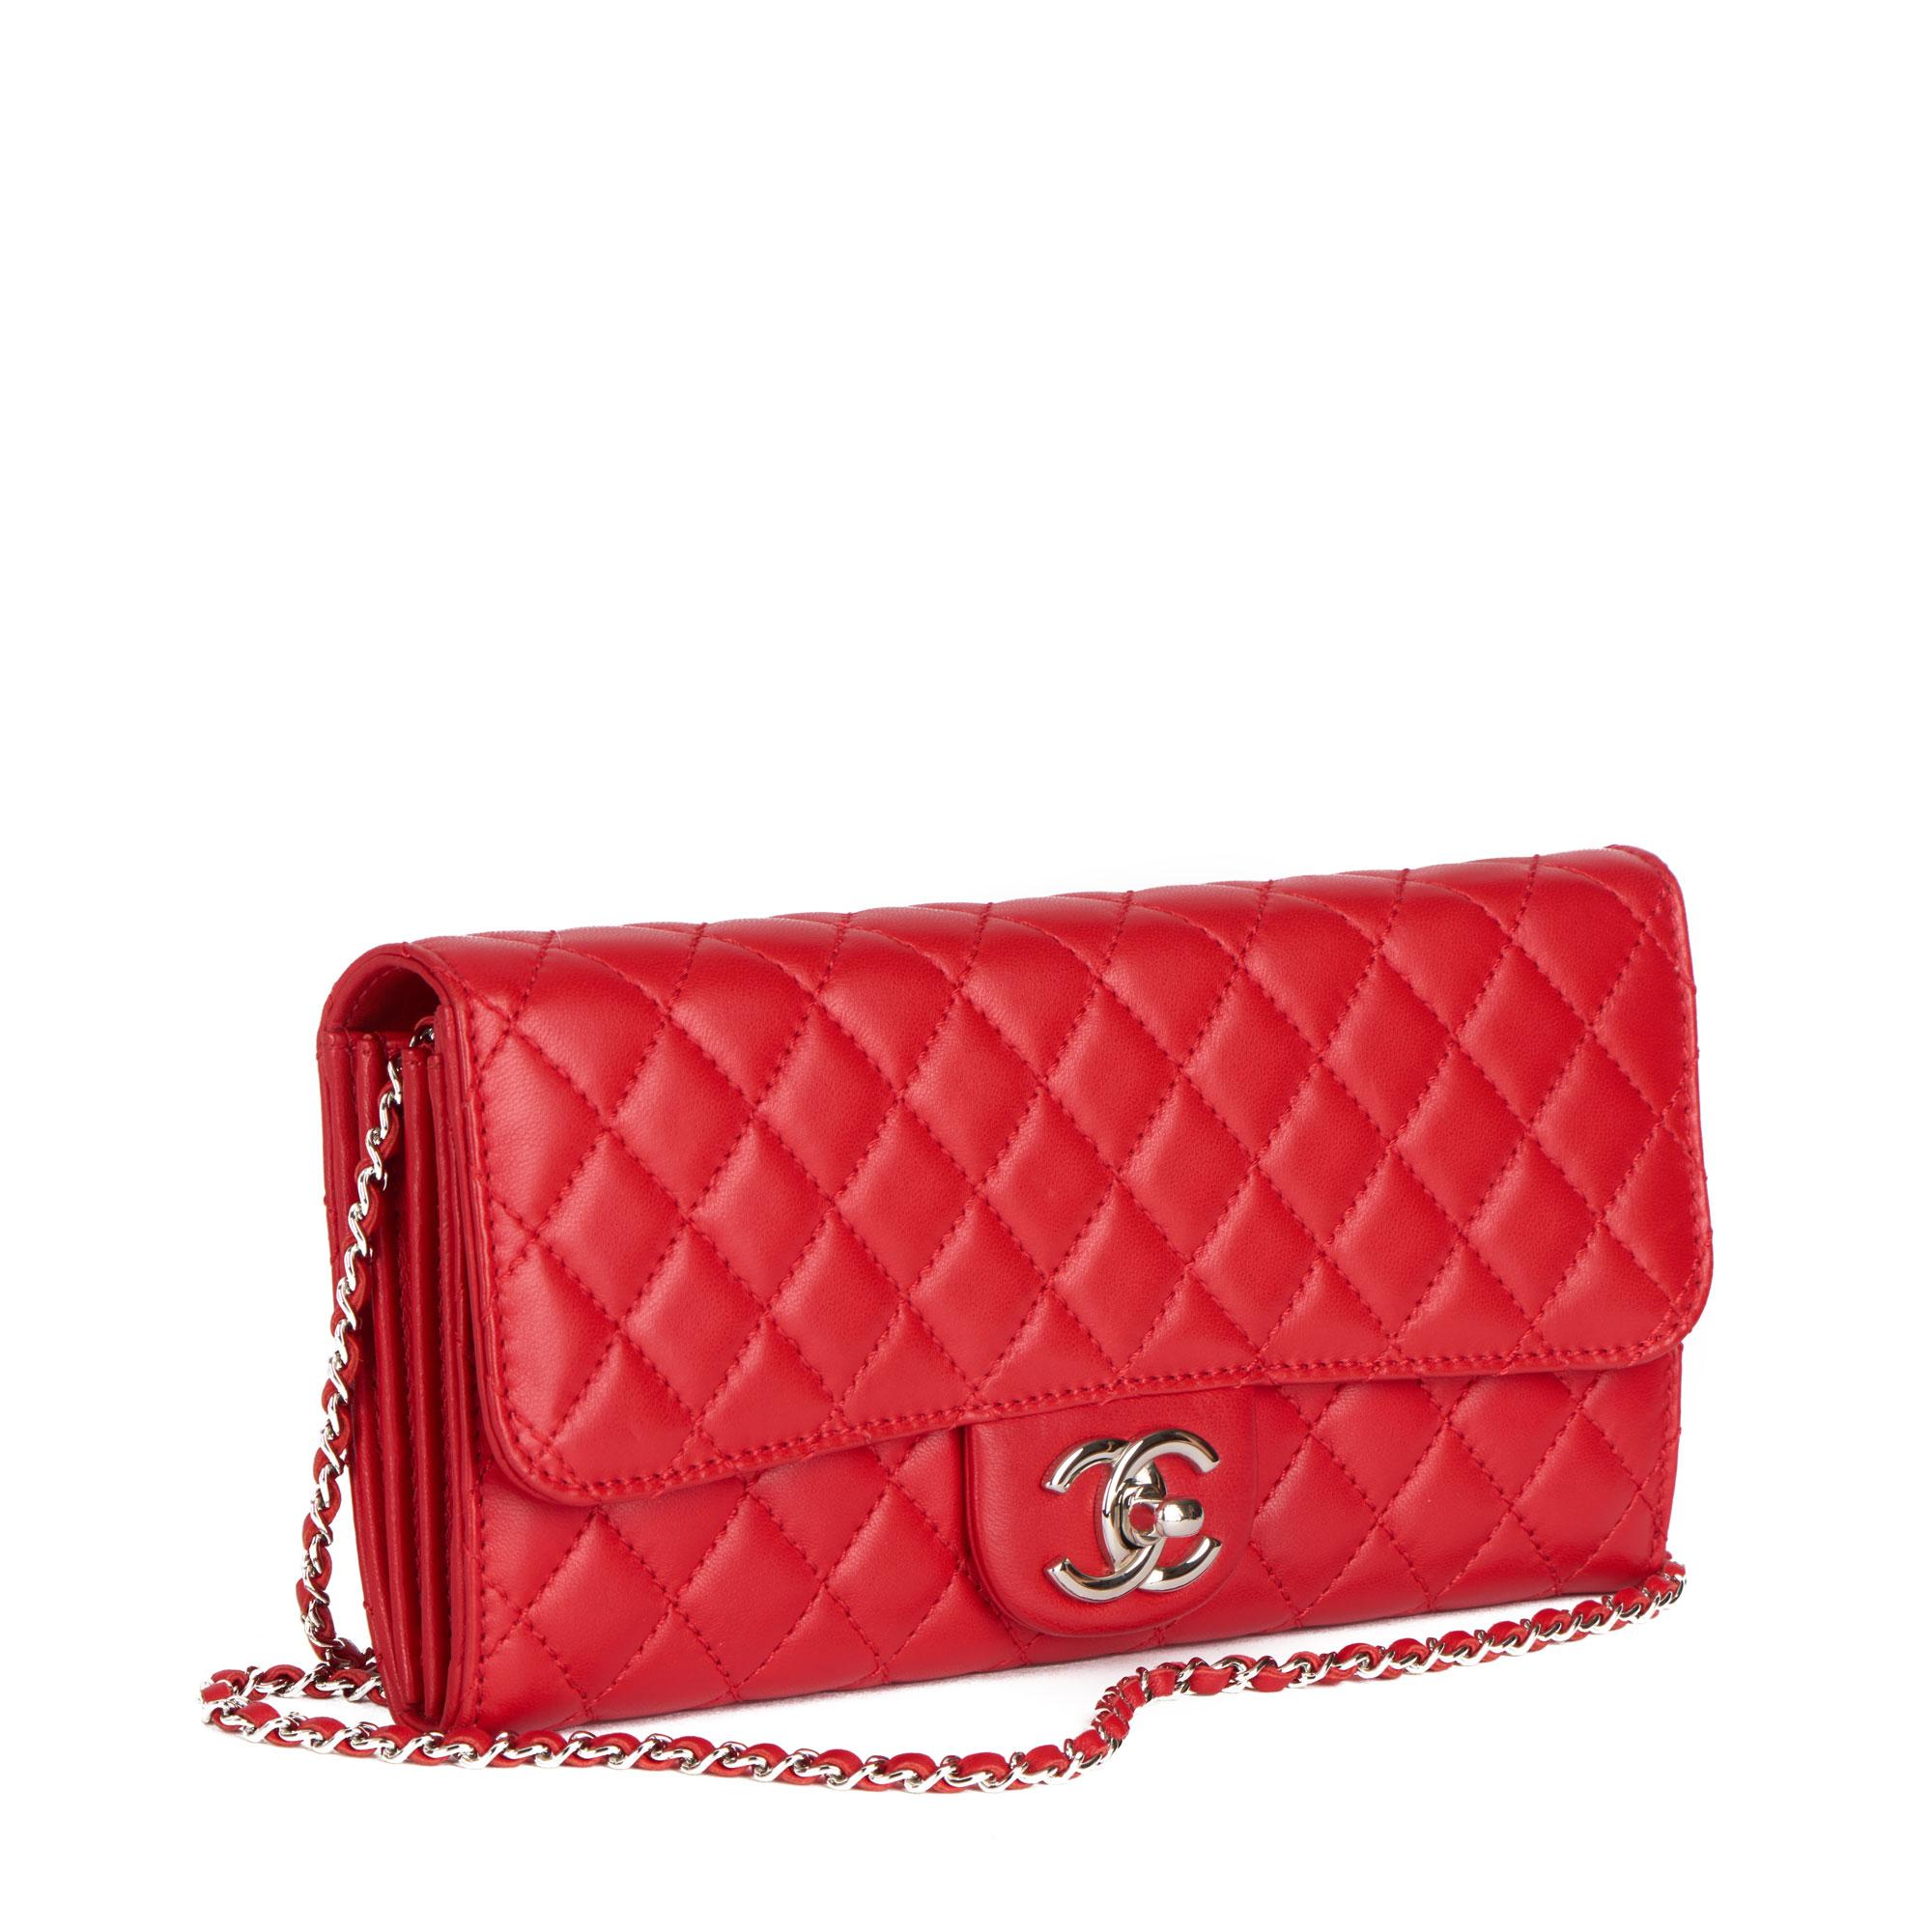 CHANEL
Red Quilted Lambskin Classic Clutch-on-Chain COC

Xupes Reference: HB4177
Serial Number: 14300422
Age (Circa): 2011
Accompanied By: Chanel Dust Bag, Box, Authenticity Card
Authenticity Details: Authenticity Card, Serial Sticker (Made in